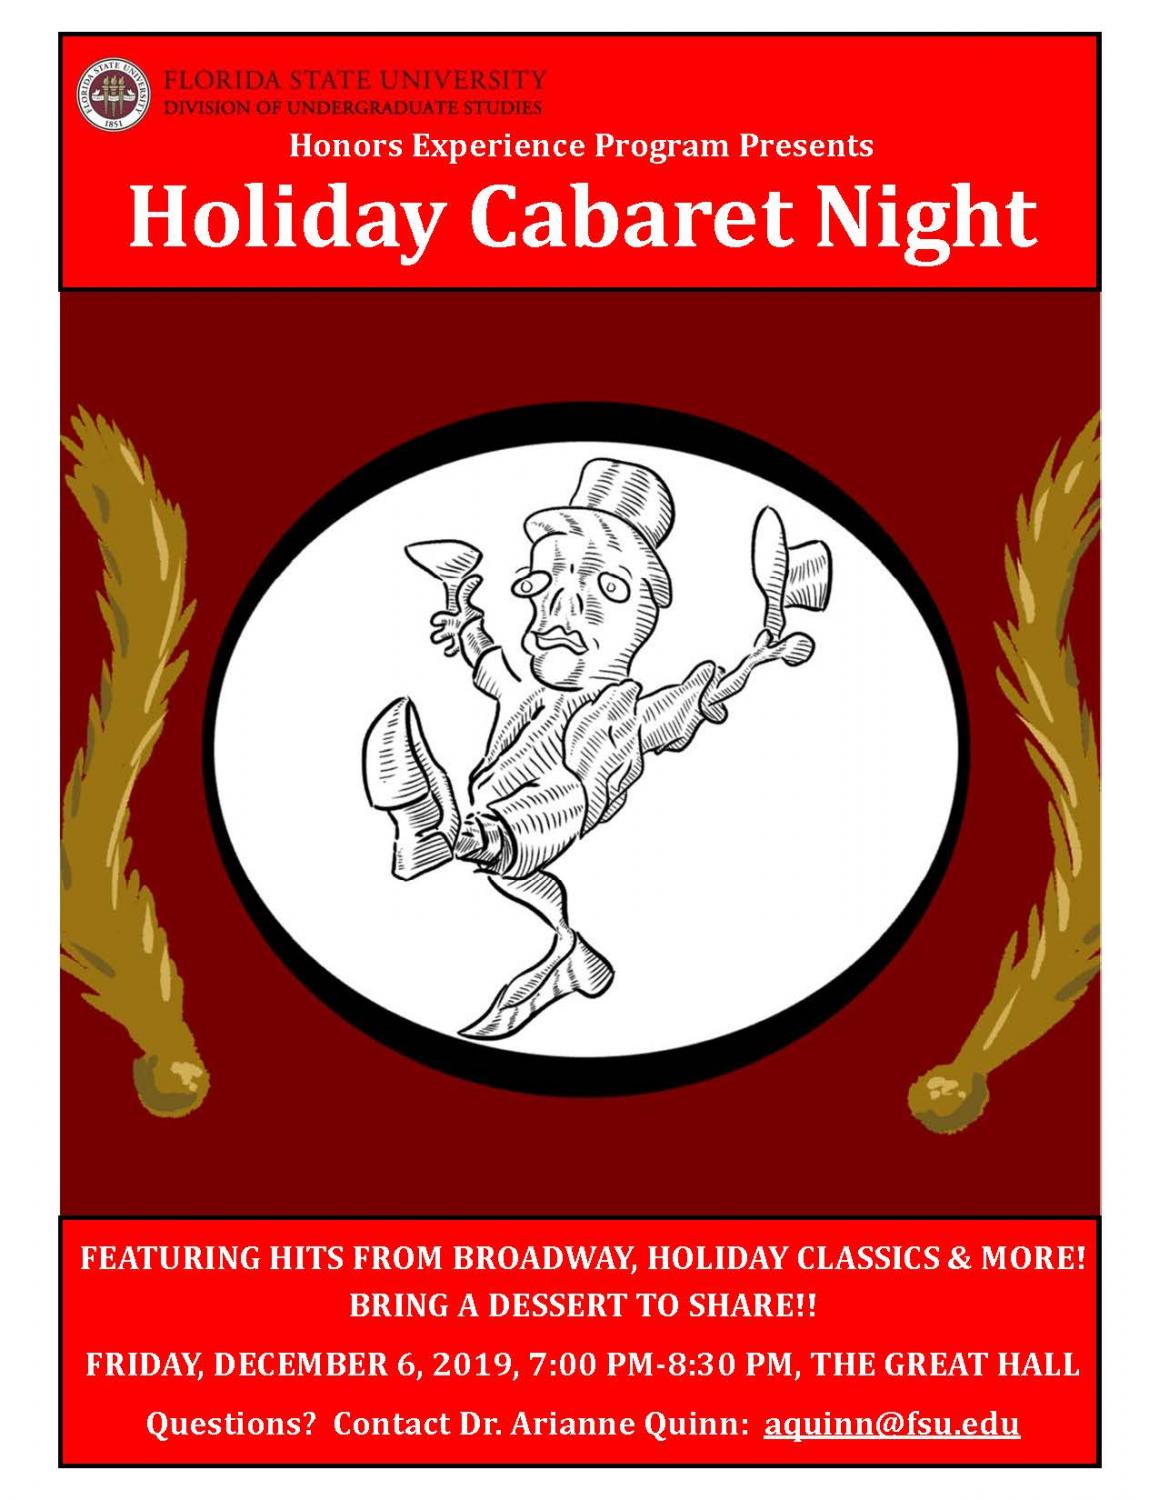 Fall 2019 Cabaret Night Flyer for Event-12.06.2019